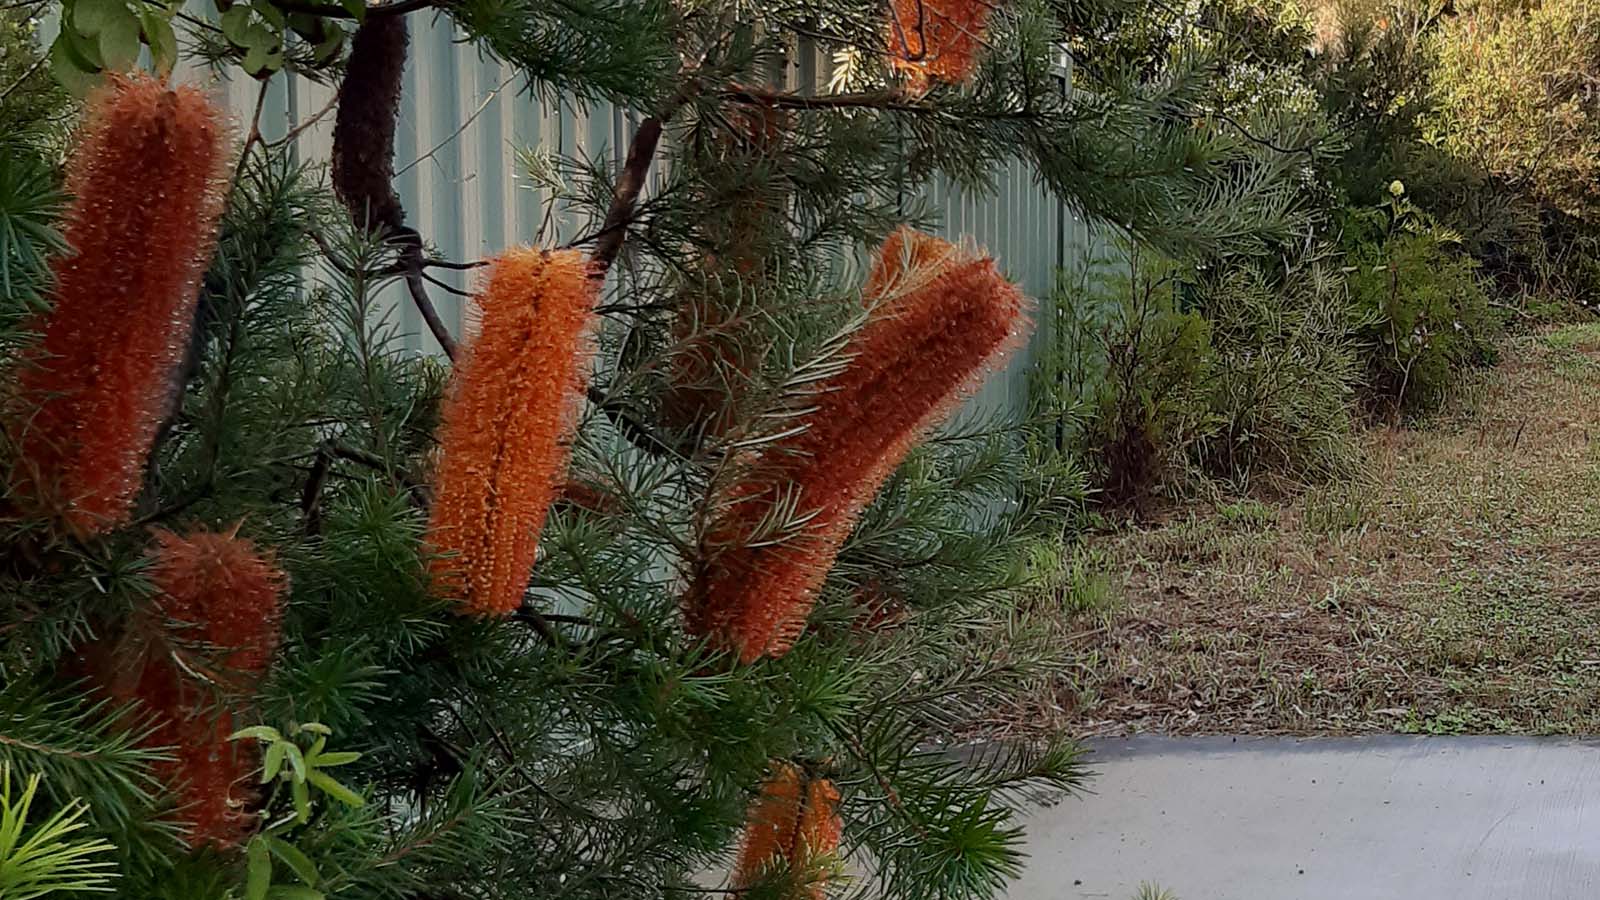 Image Banksia flowers growing next to a paved area.